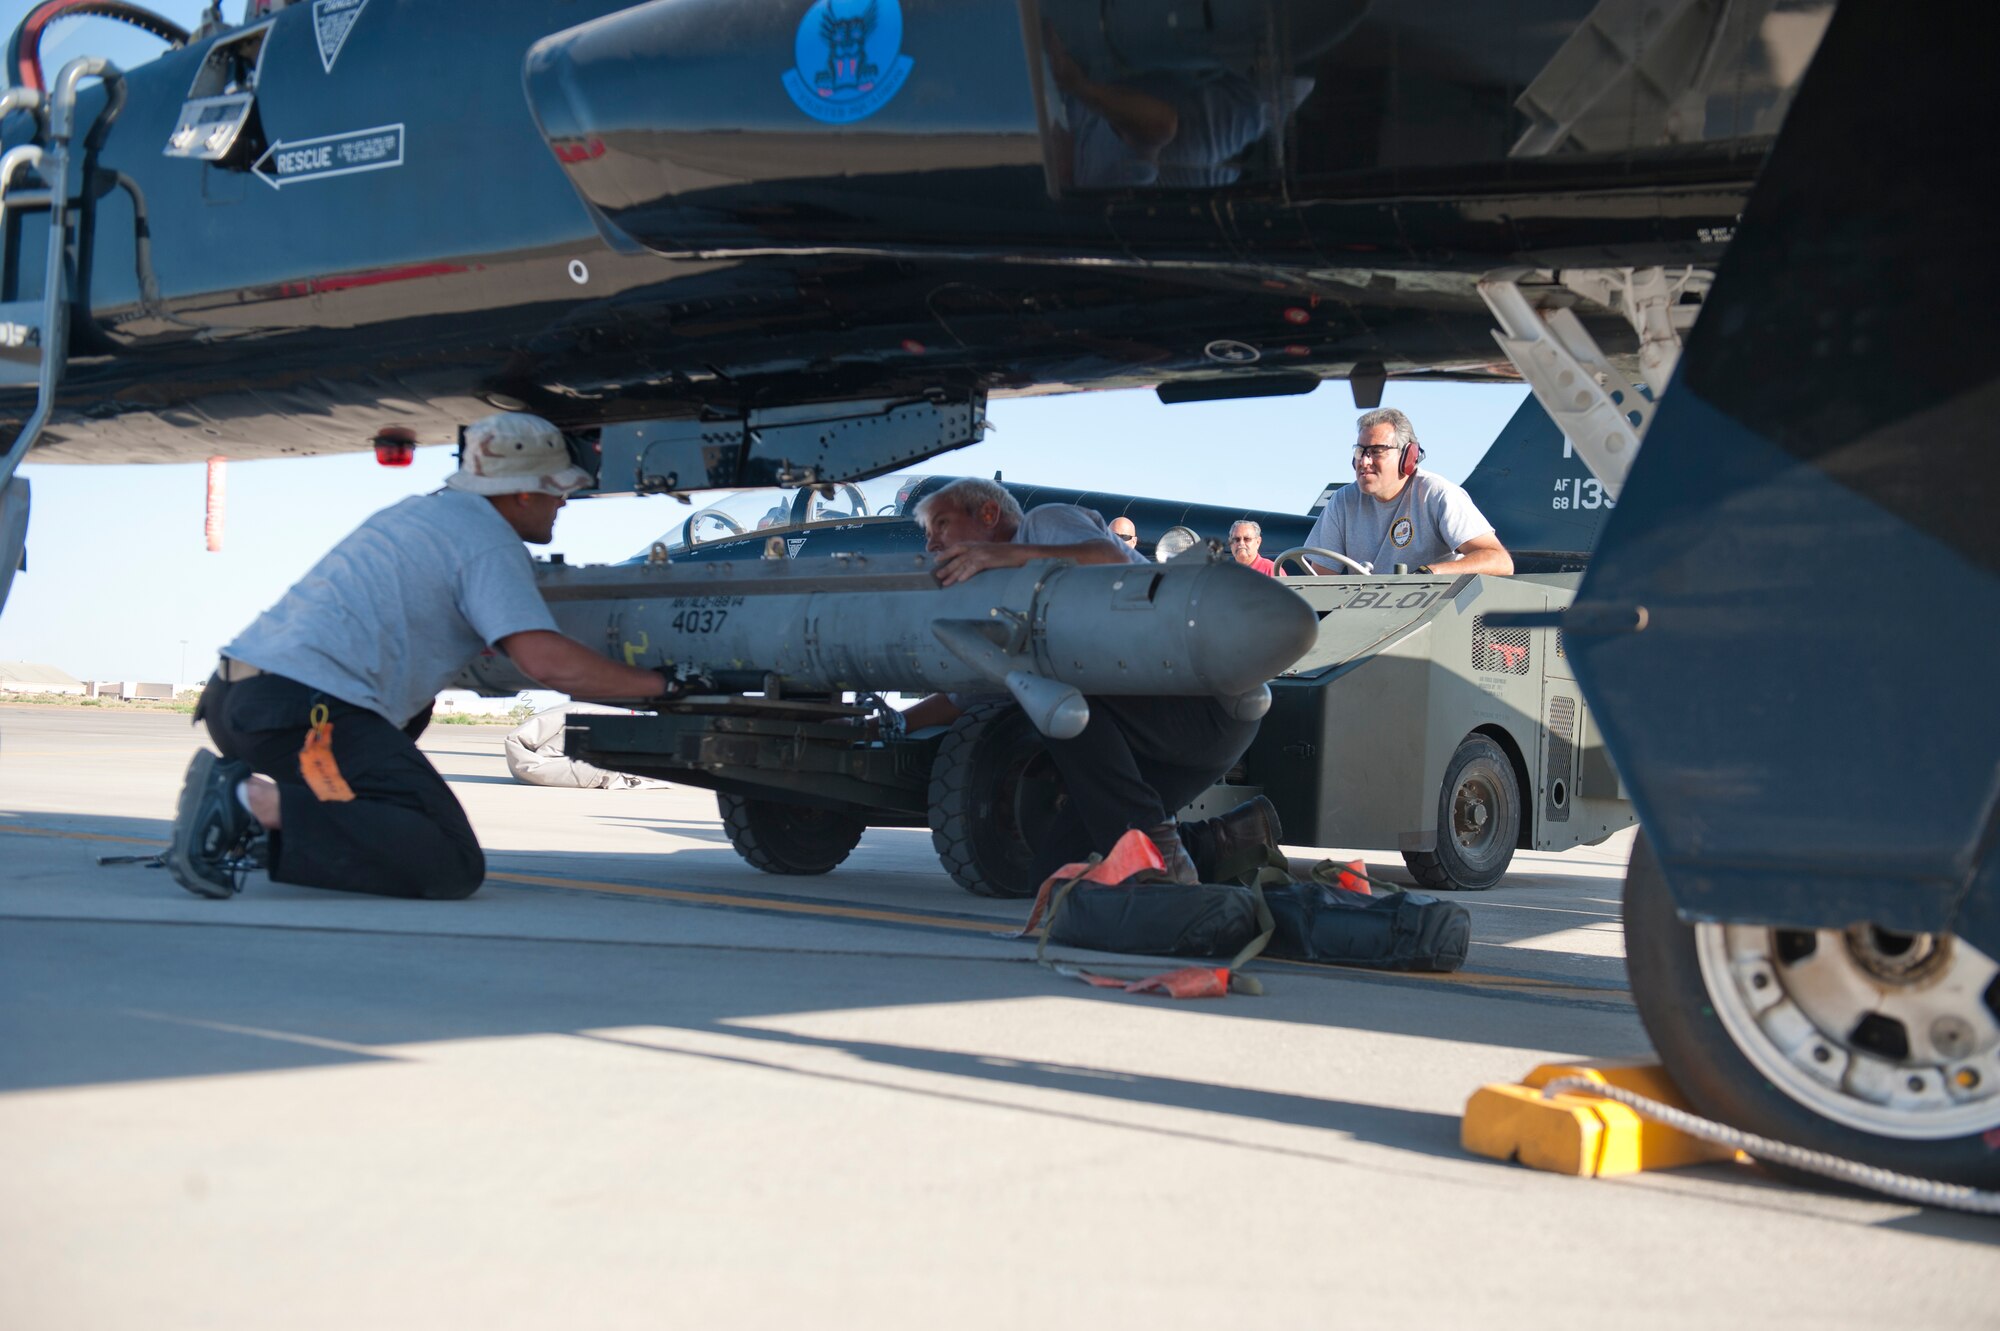 Raul Ceniceros, Ronald Legand, and Jeremy Hale, all M1 Support Services maintainers, attach a radar jammer pod onto a T-38 Talon at Holloman Air Force Base, N.M., Jun 4. For the first time, the T-38 has been modified to fit the ALQ-188 pod for use as a radar jammer. This newest addition to the T-38 will assist in its training mission by making it a more effective adversary for the F-22 Raptor during simulated combat exercises. (U.S. Air Force photo by Airman 1st Class Daniel E. Liddicoet/Released)

